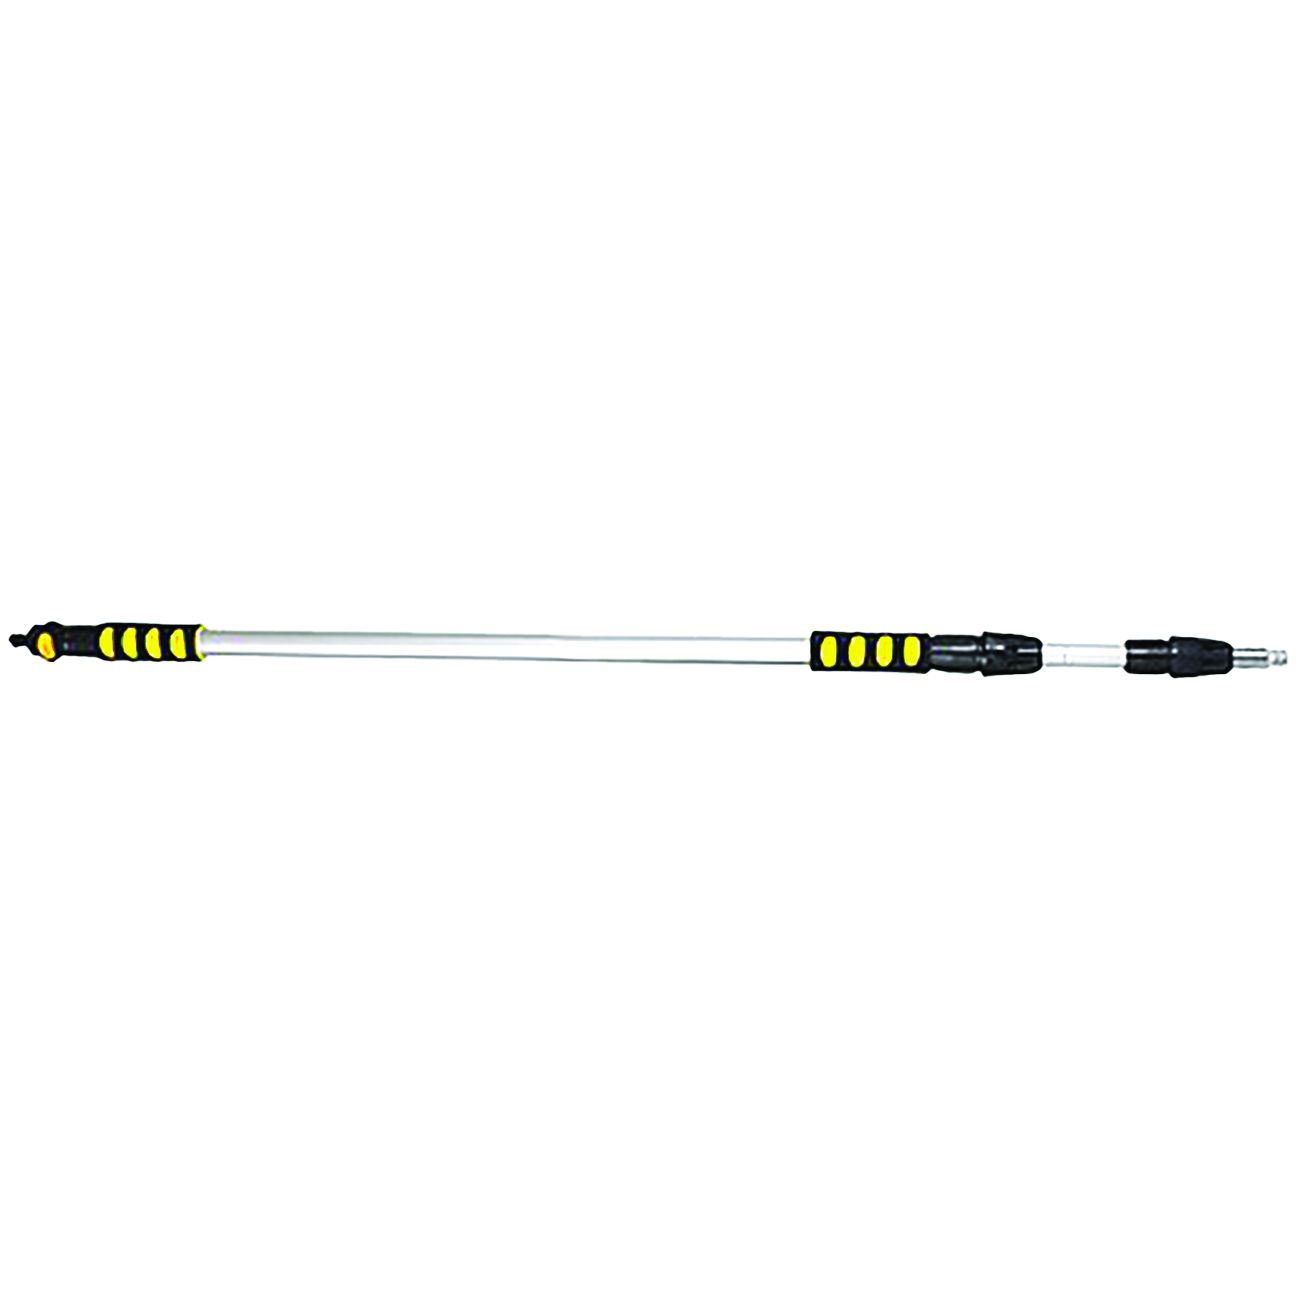 RTX CN1965BP - Telescopic Handle adjustable from 4' to 8'